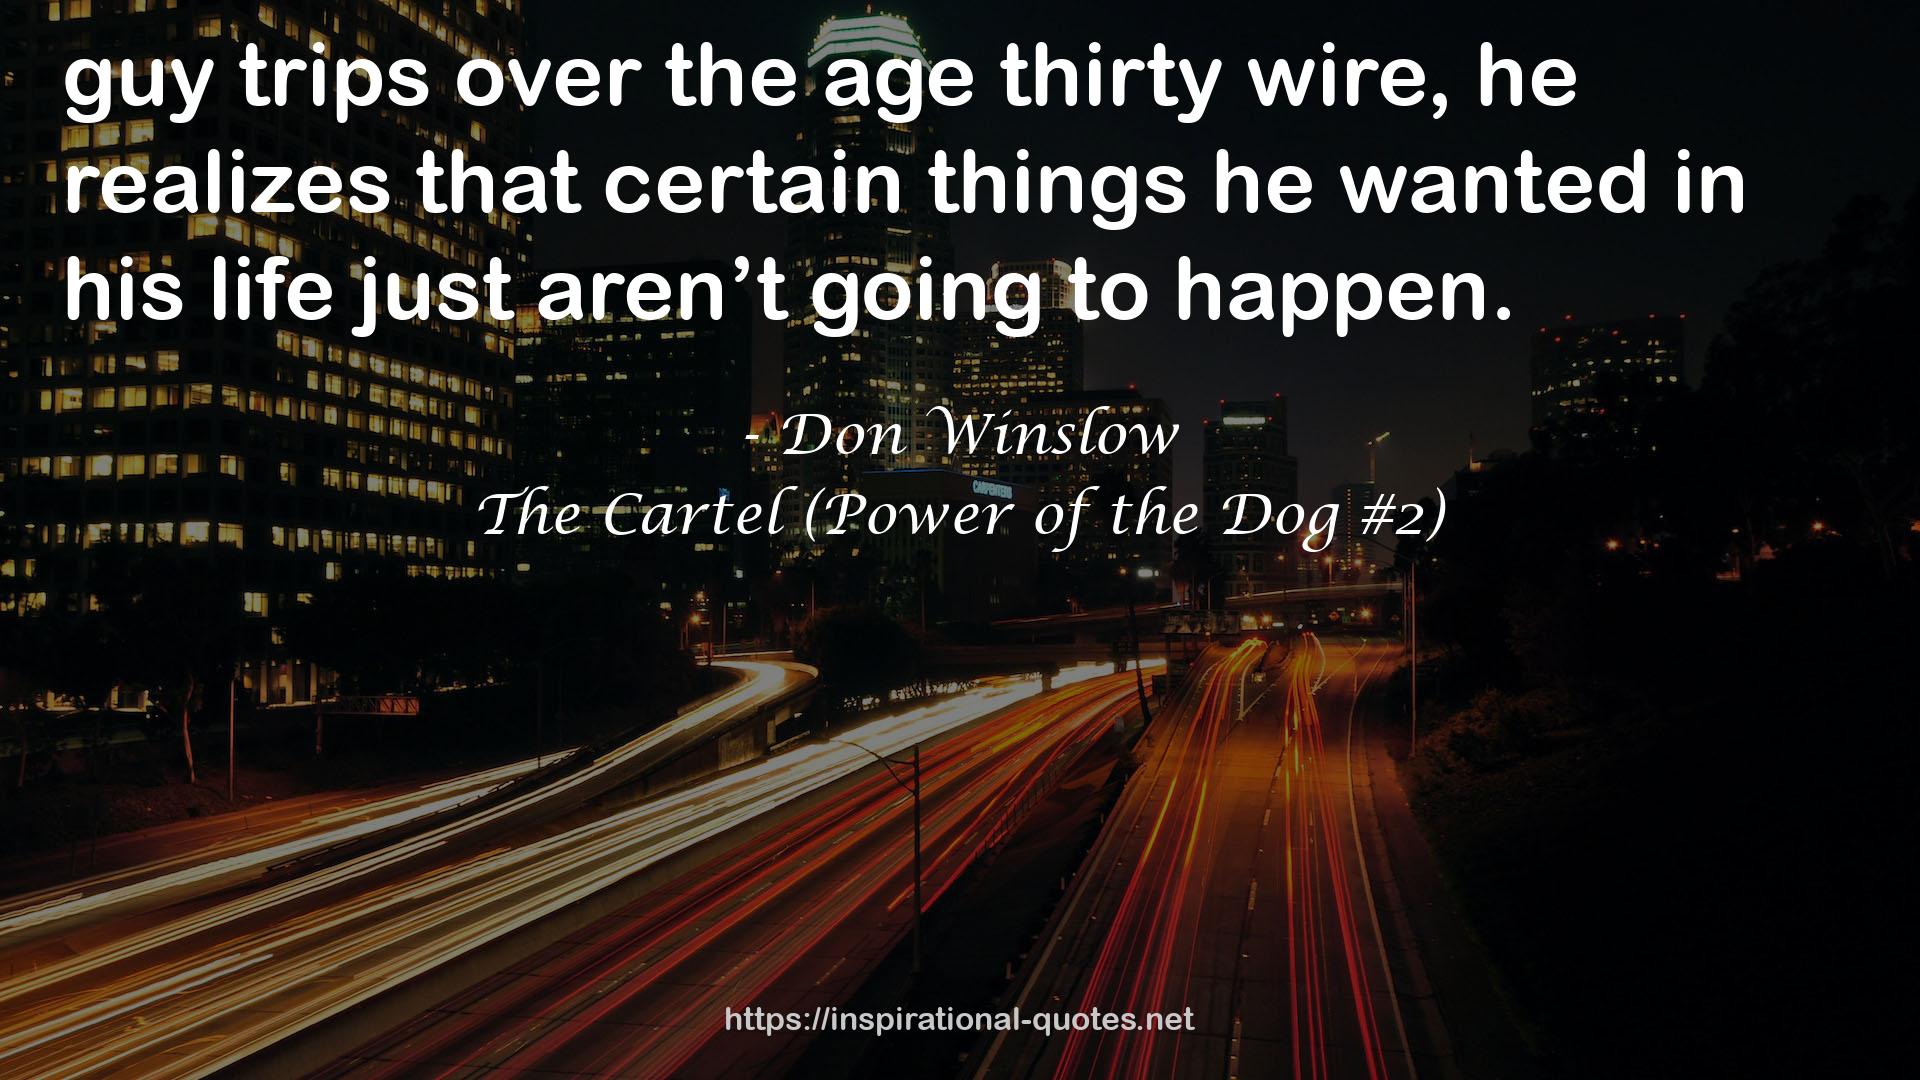 The Cartel (Power of the Dog #2) QUOTES